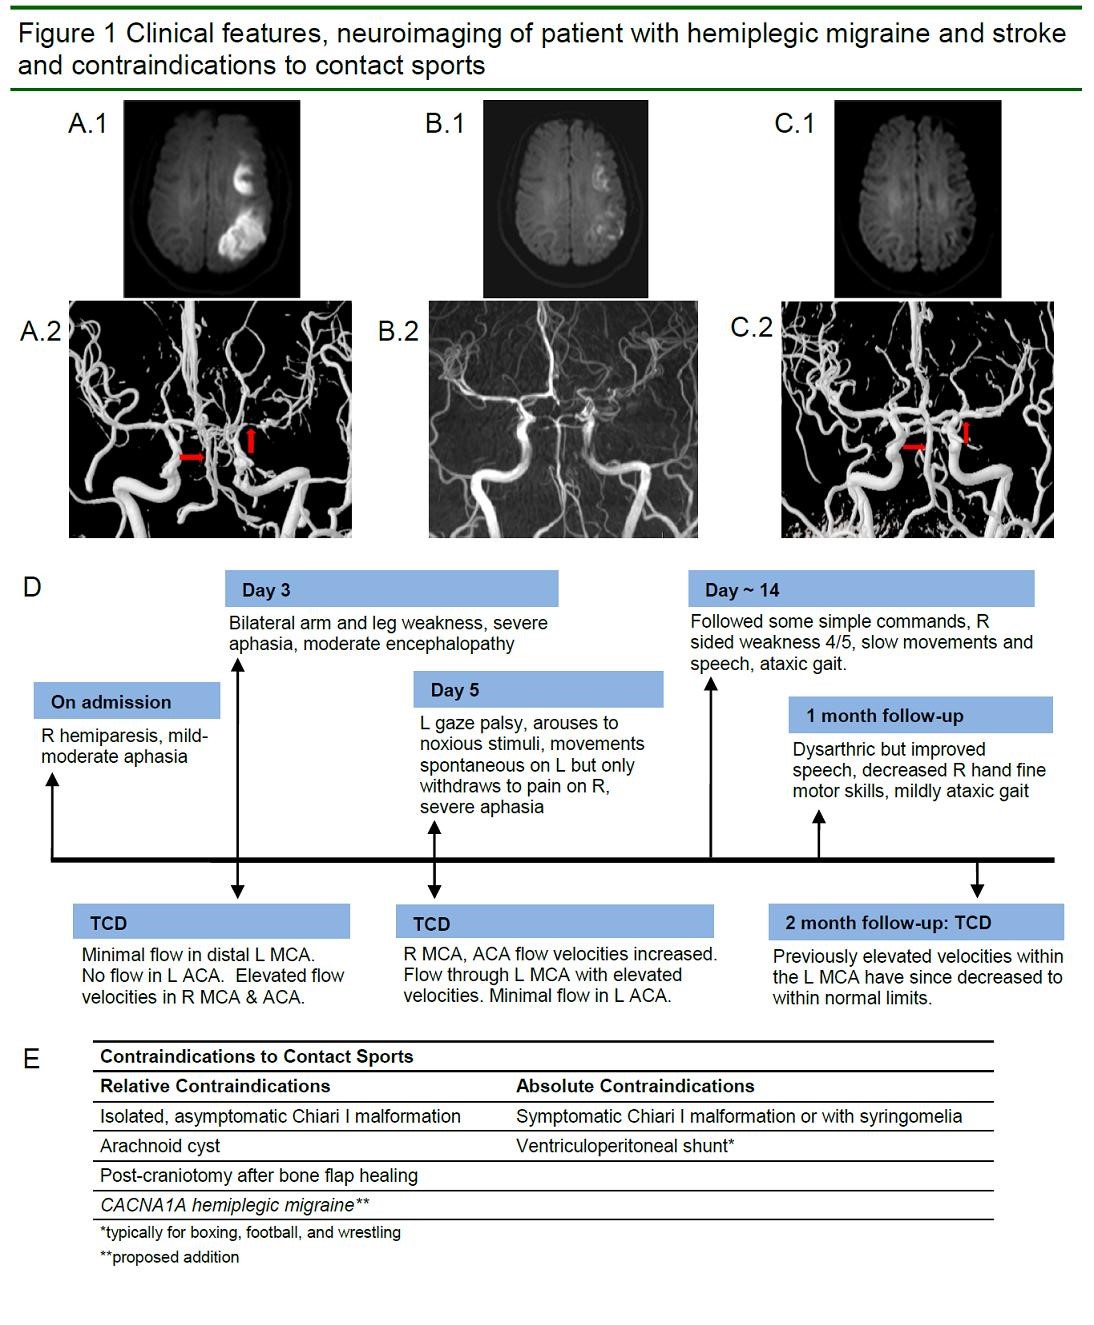 Figure 1 Clinical features and neuroimaging of a patient with hemiplegic migraine and stroke